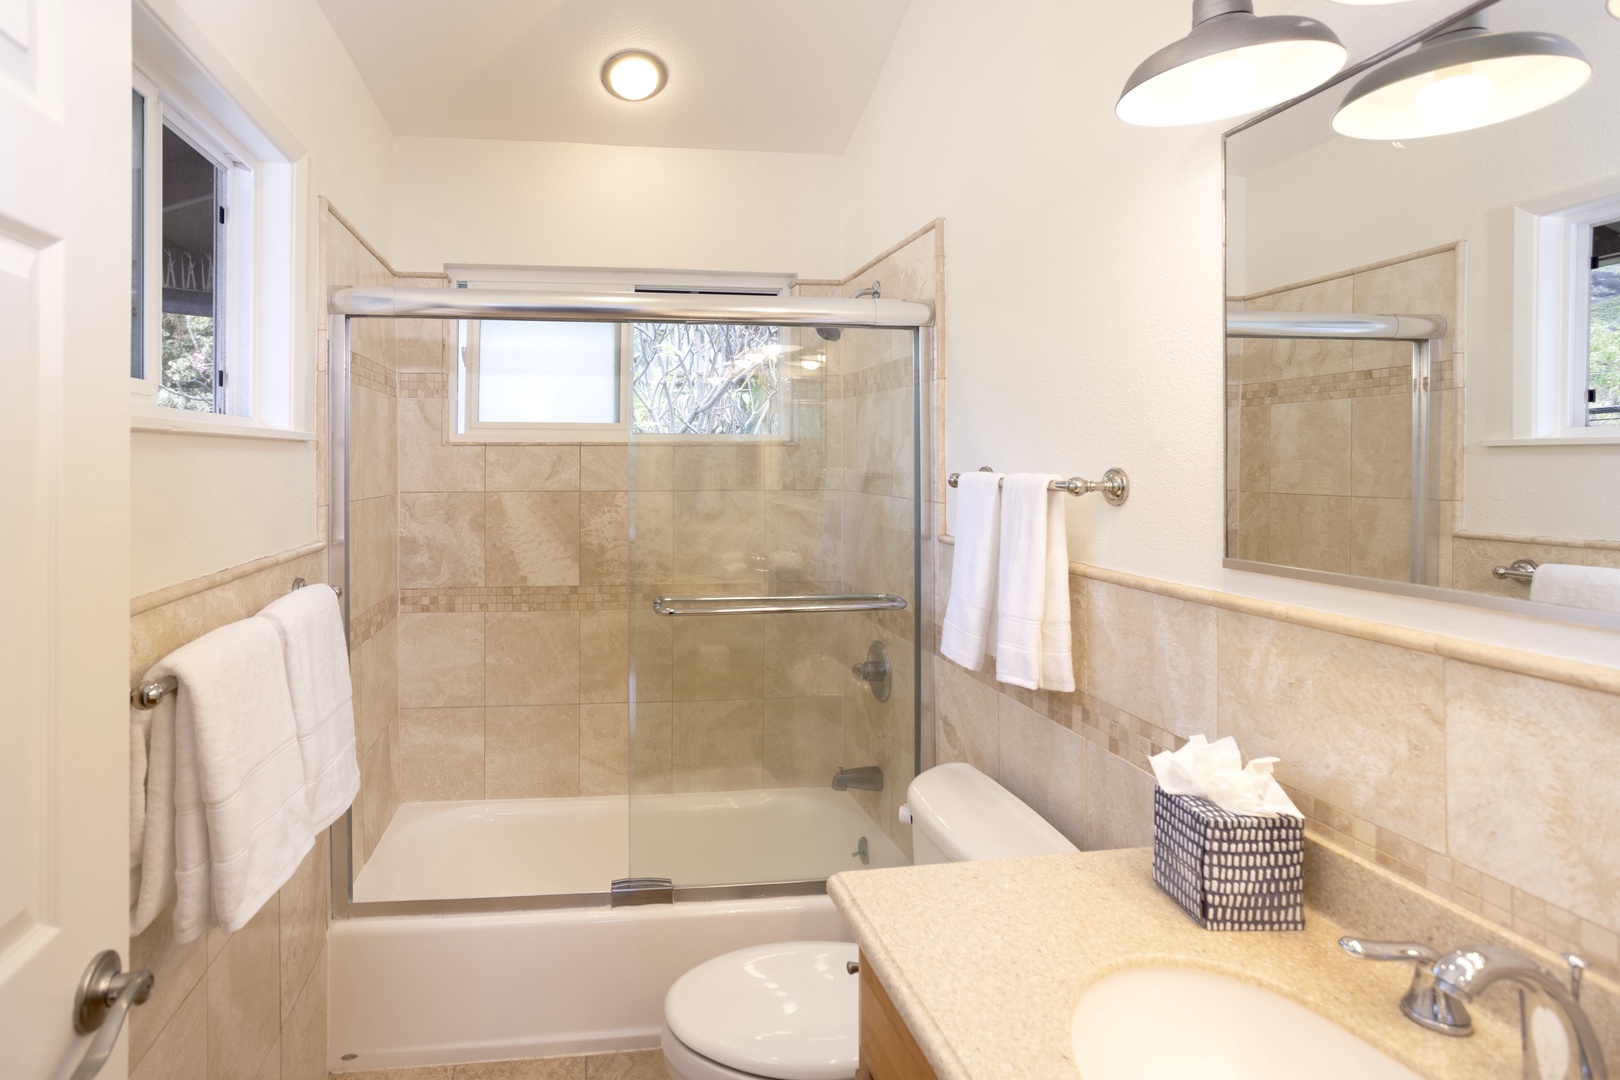 Kailua Vacation Rentals, Mokulua Seaside - Ensuite bathroom with a shower/tub combo with a glass enclosure